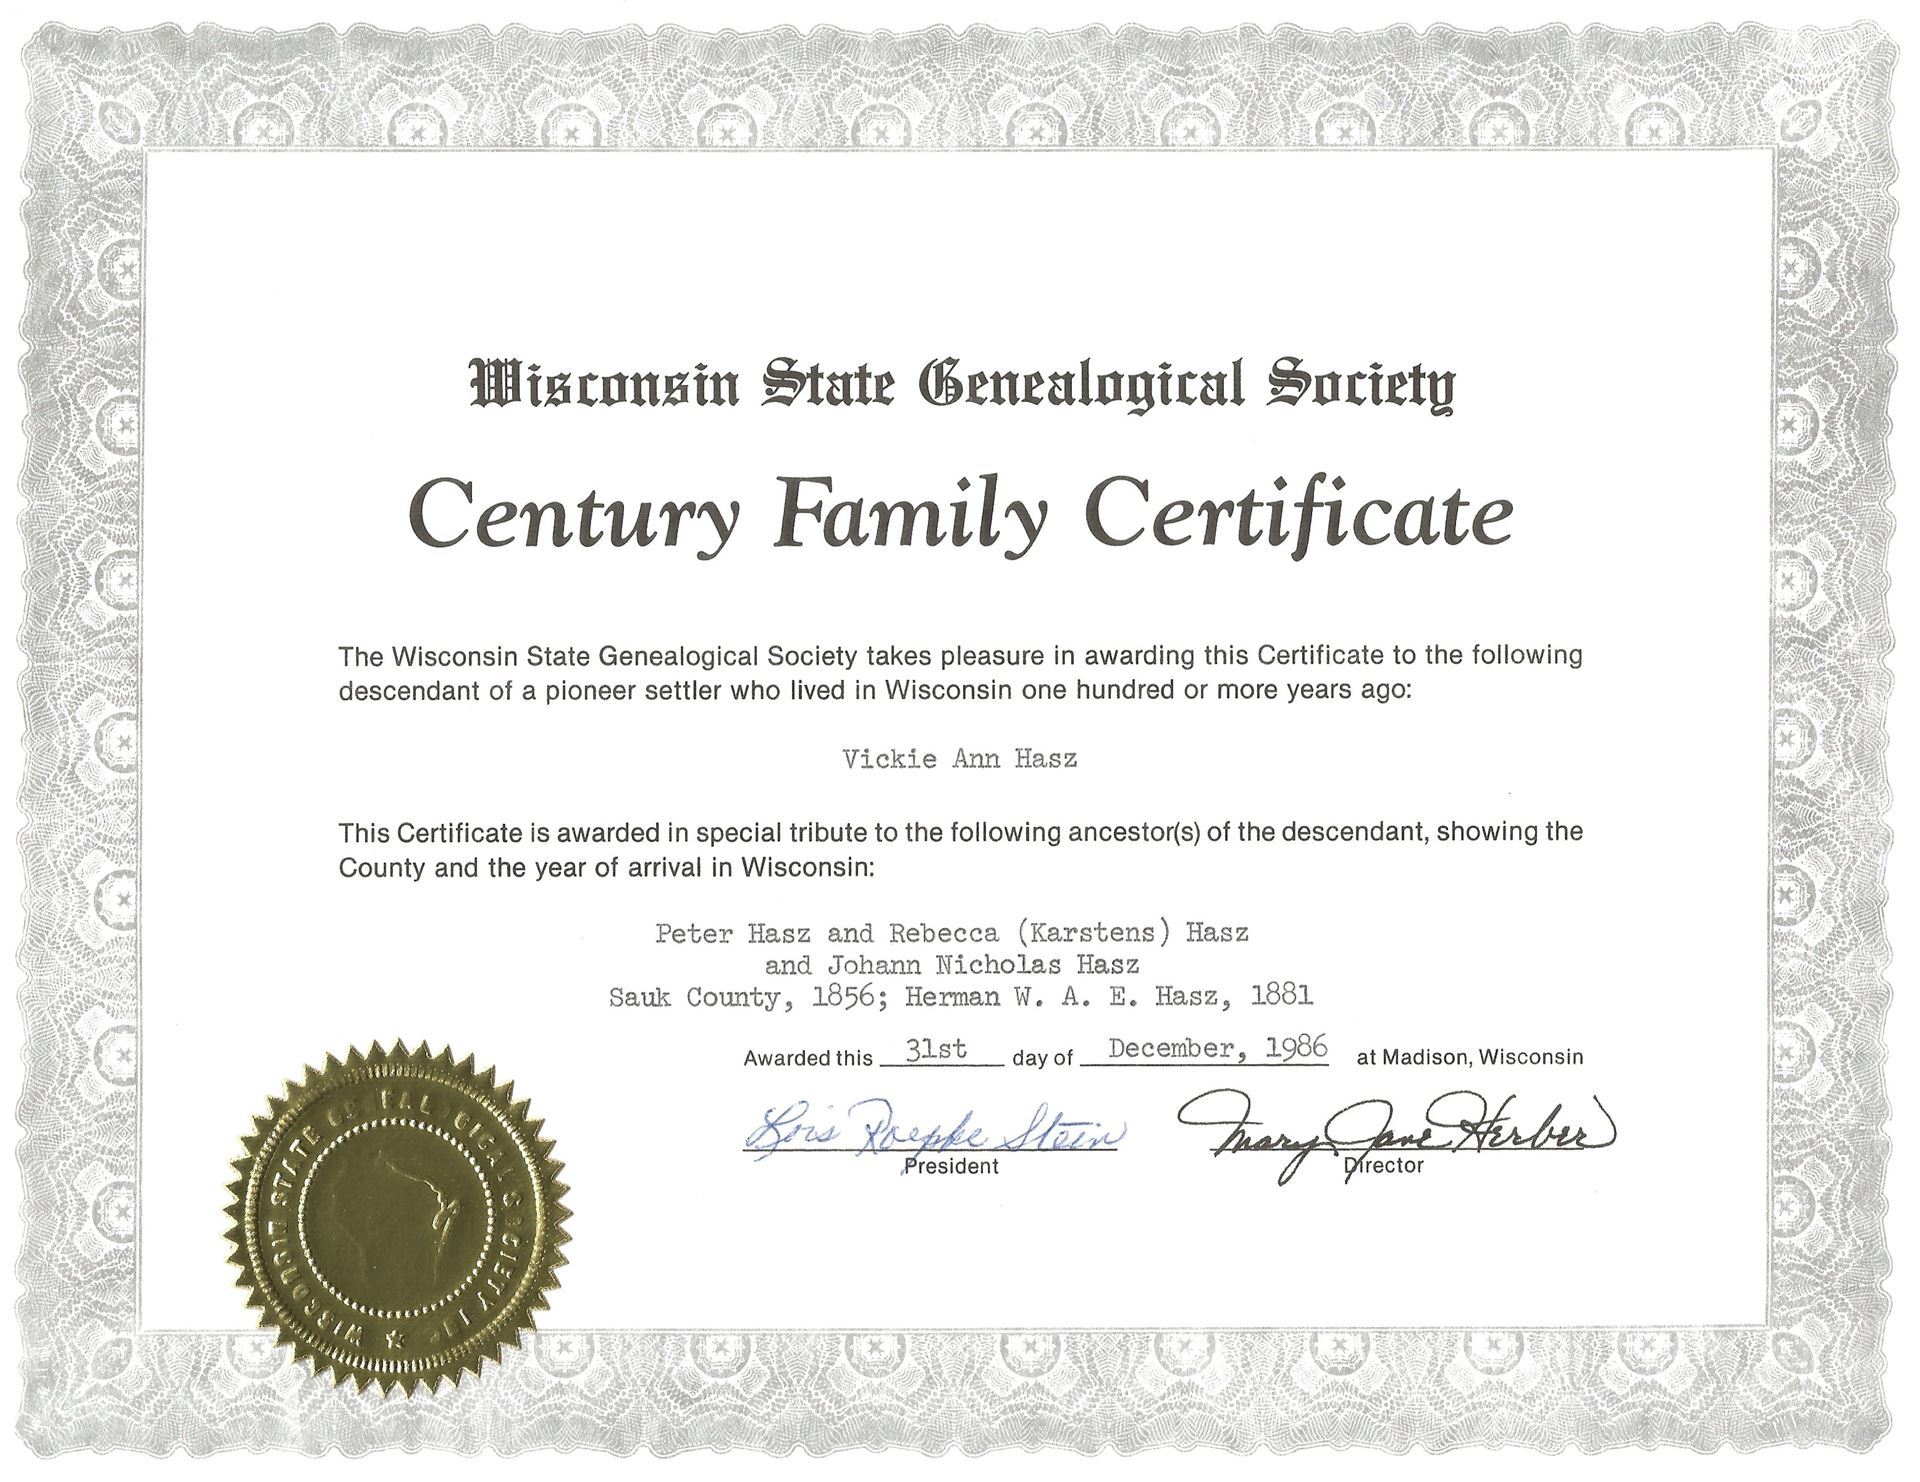 WSGS Century Family Certificate